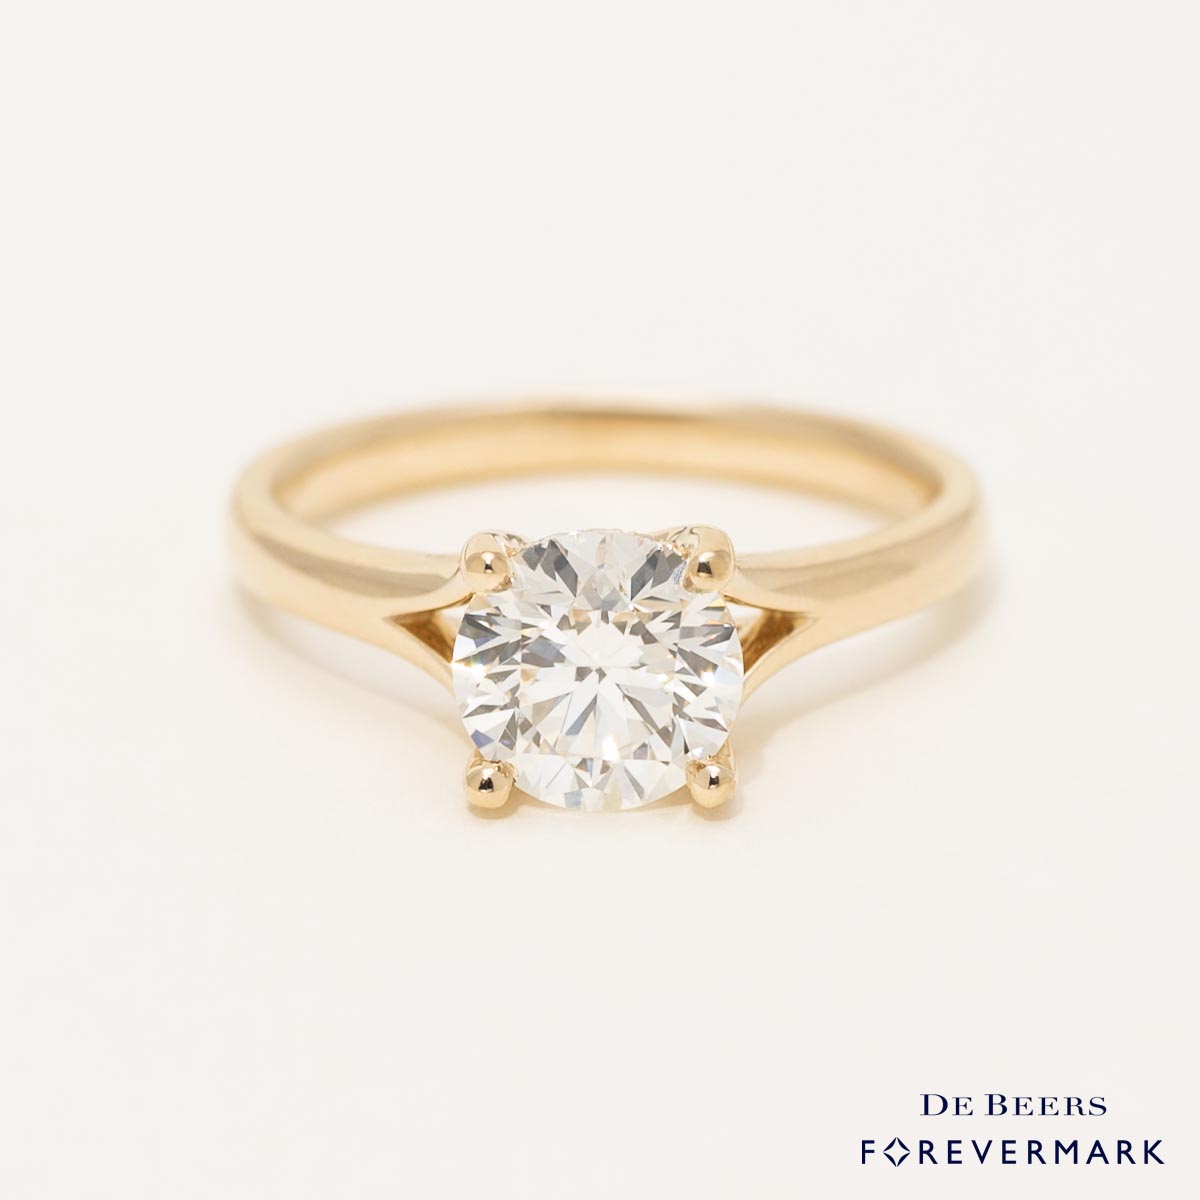 De Beers Forevermark Black Label Diamond Engagement Ring in 14kt Yellow Gold (1 1/2ct tw)